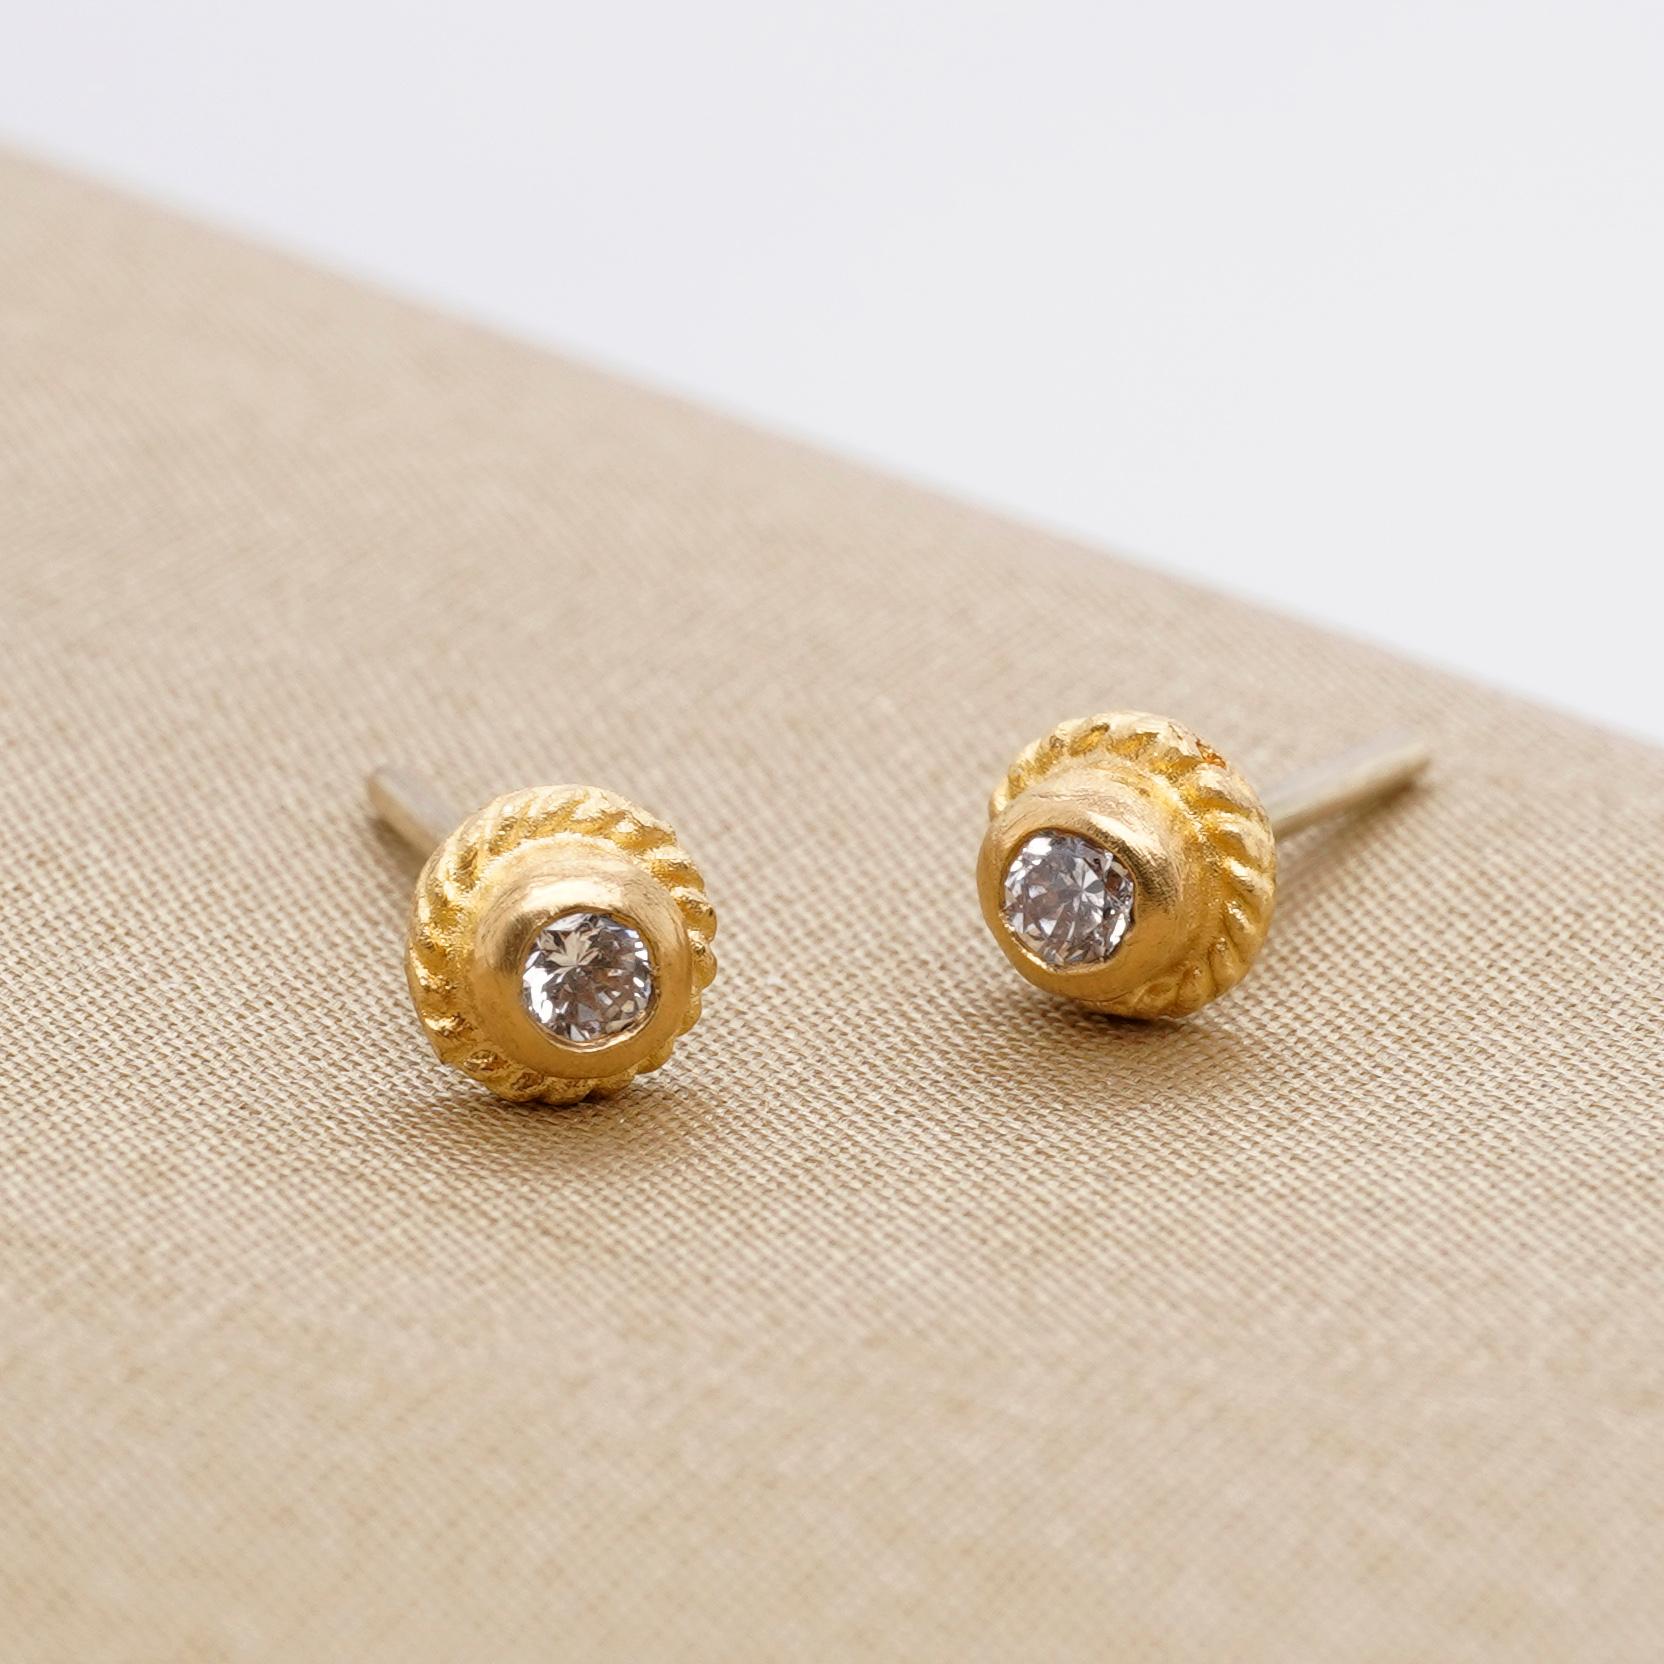 Circle Textured Stud Earrings with Diamonds in 24kt Gold by Prehistoric Works of Istanbul, Turkey. Measures: 5.25mm x 5.25mm. 24kt Gold: 1.25 g; Diamonds: 0.18 ct